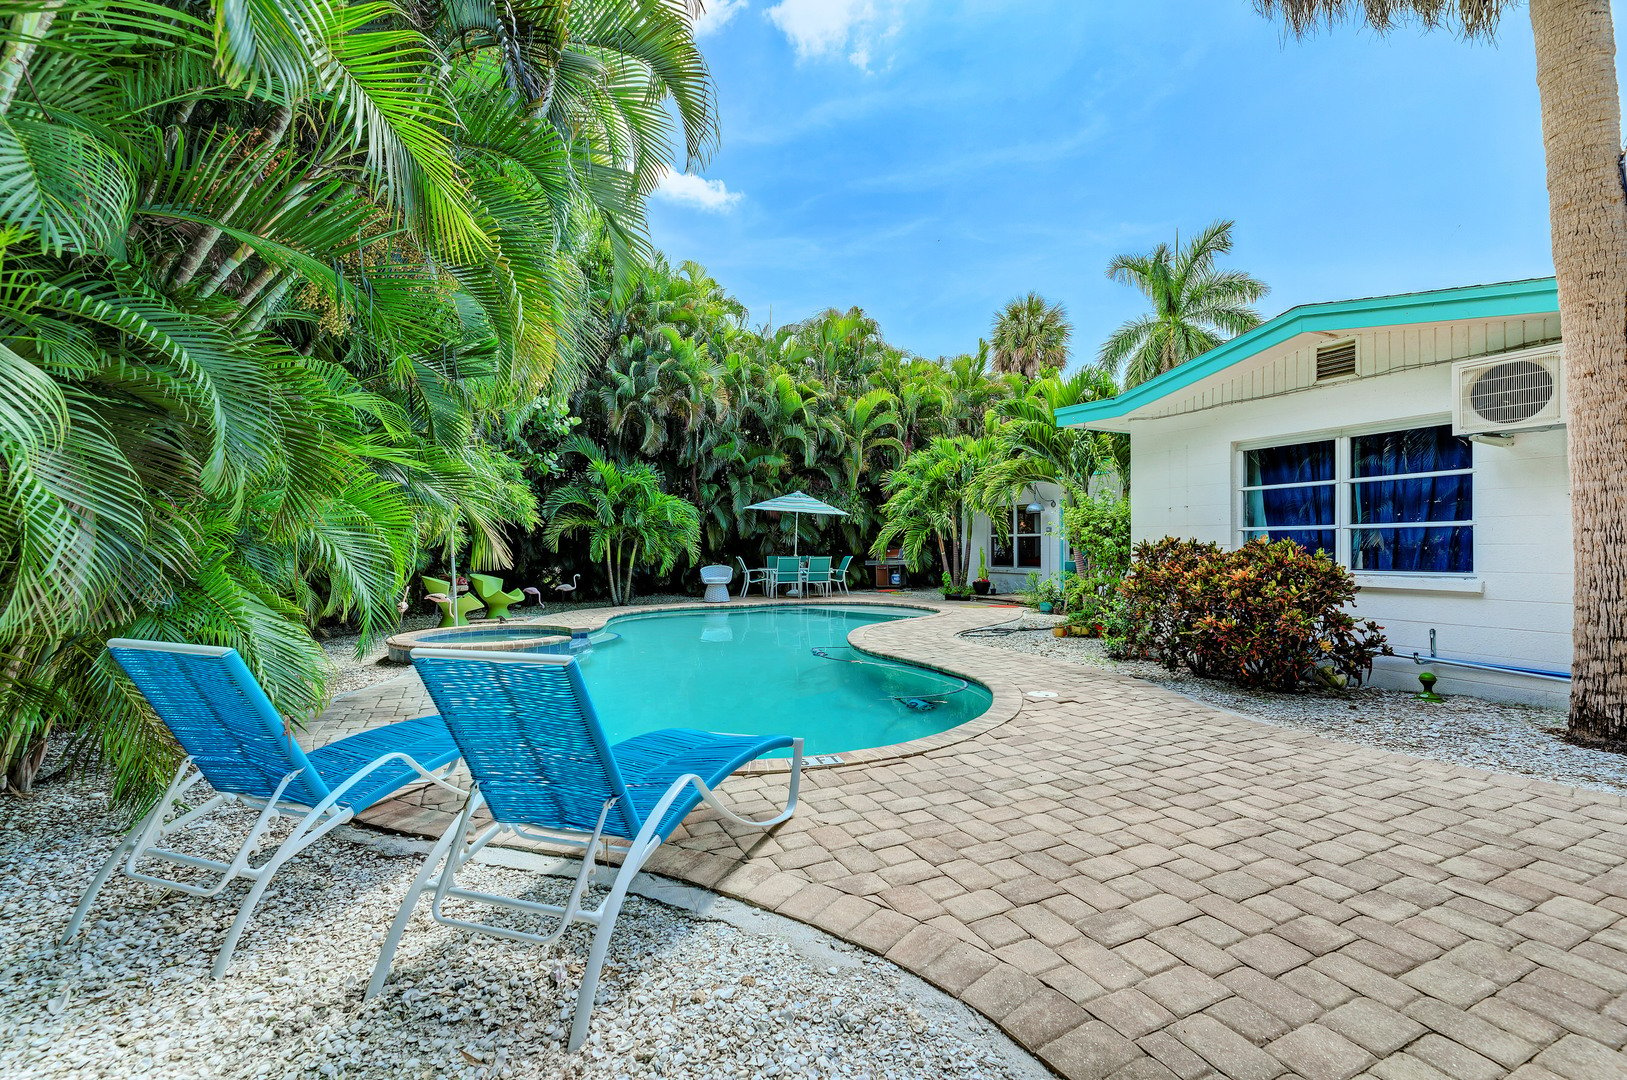 Mary Ann of Anna Maria pool pavers & loungers